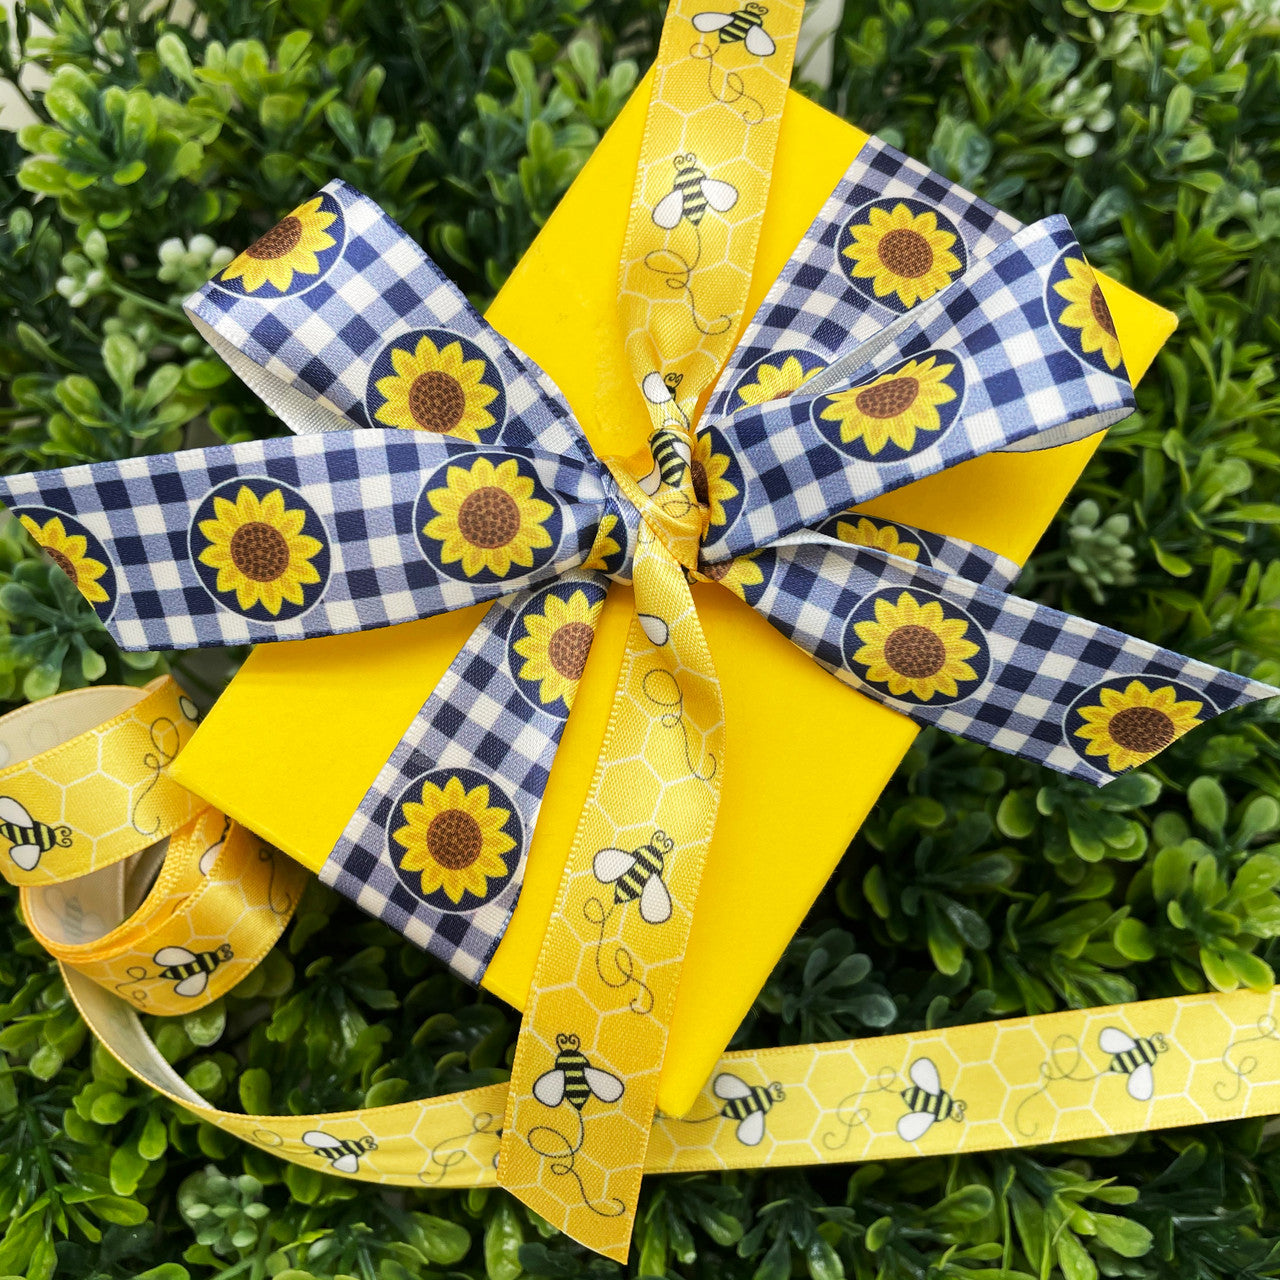 Mix and match our adorable Sunflower ribbon with our bees to make the sweetest Summer packages ever!